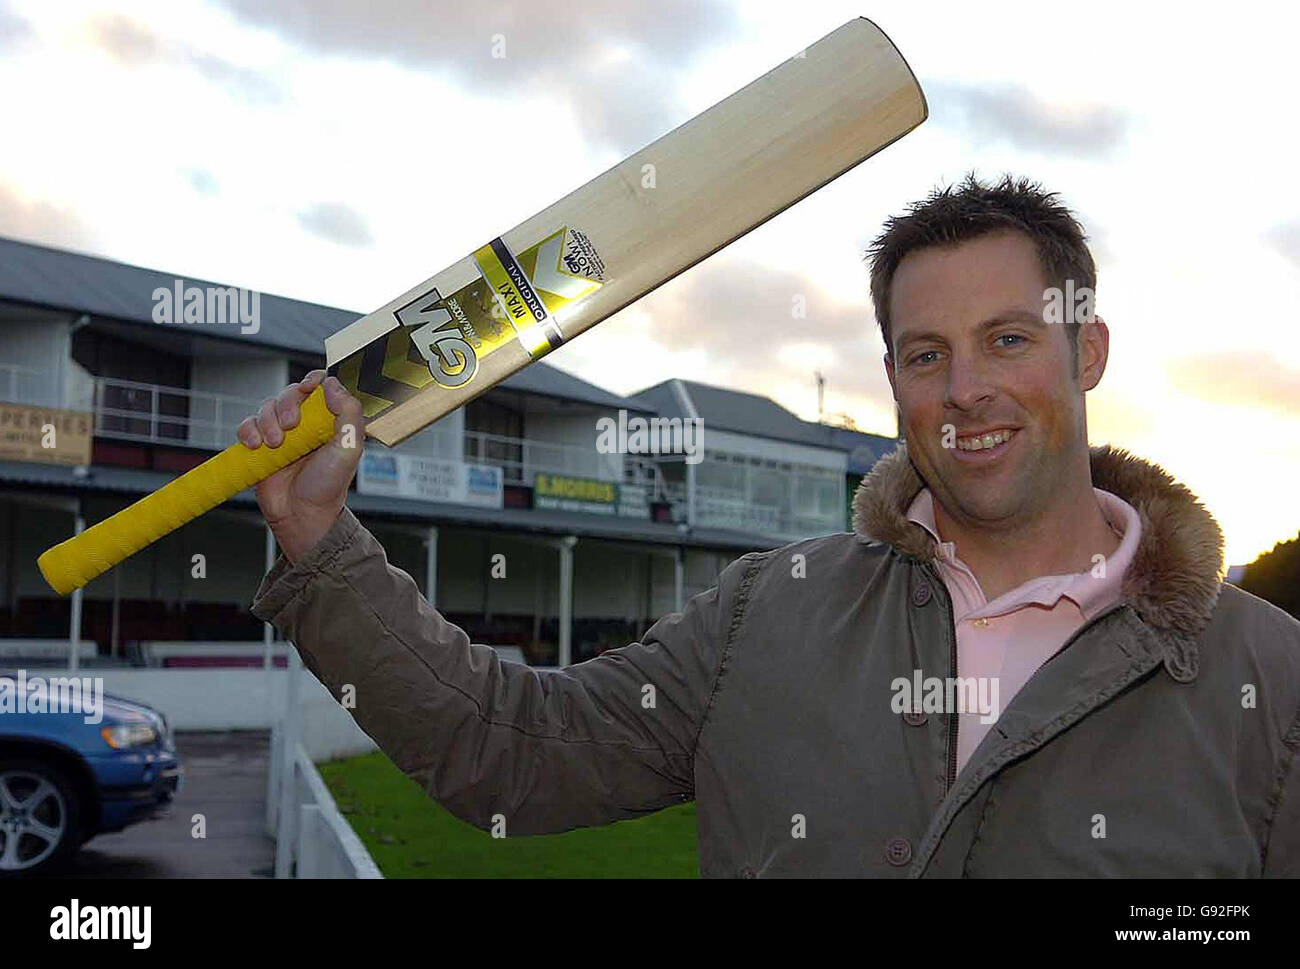 England batsman Marcus Trescothick celebrates his award of an MBE in the New Years Honours List, at the County Ground, Taunton, Somerset, Friday December 30, 2005. See PA story SPORT Honours. PRESS ASSOCIATION Photo. Photo credit should read: PA. Stock Photo